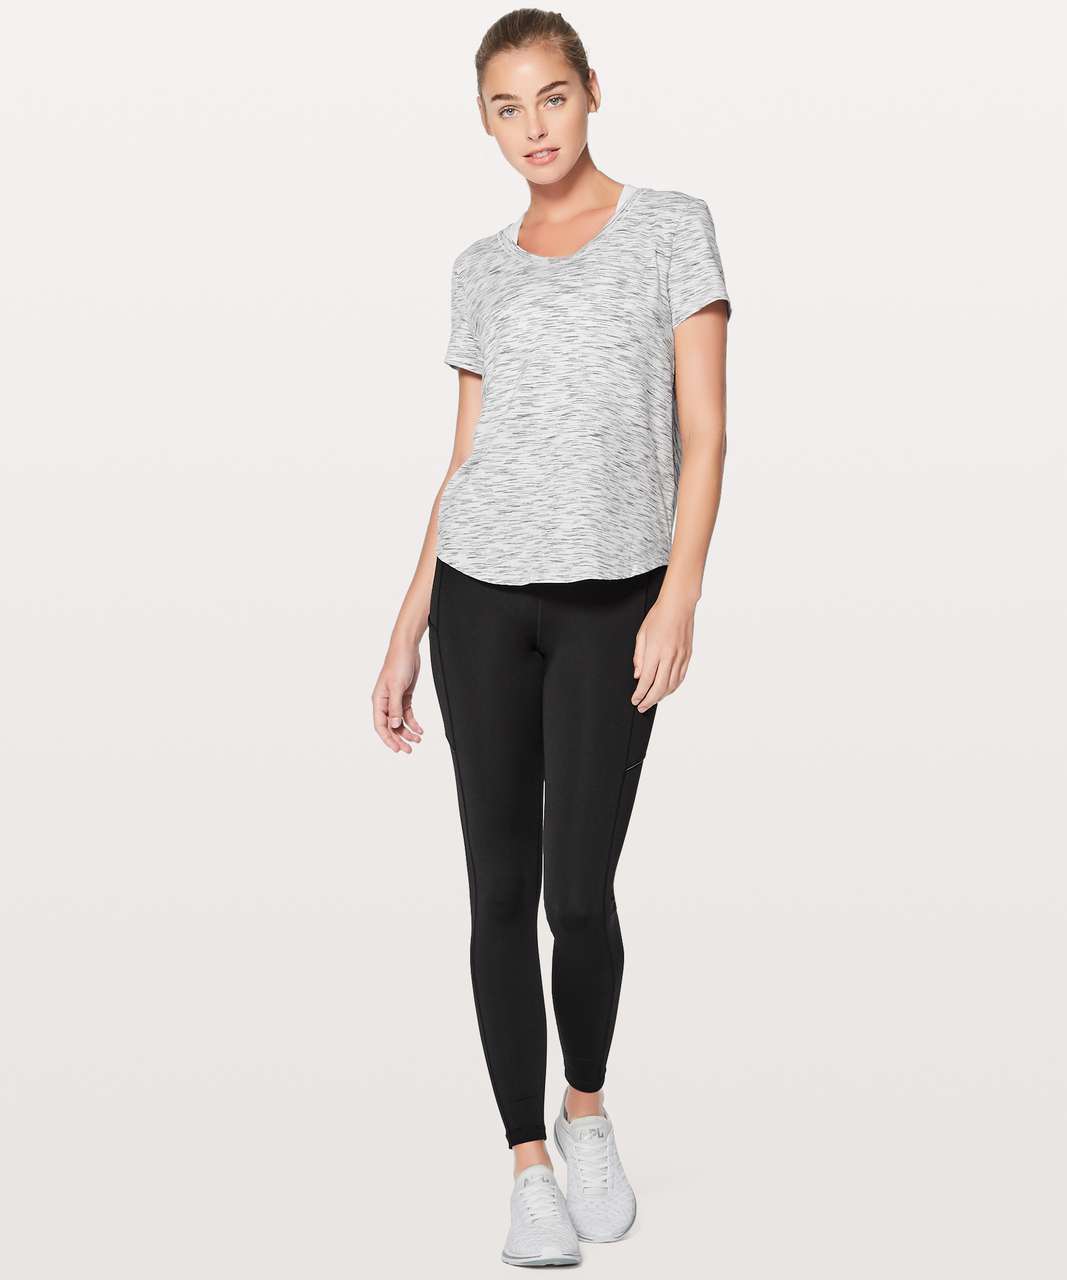 Lululemon Meant To Move Tee - Tiger Space Dye Black White